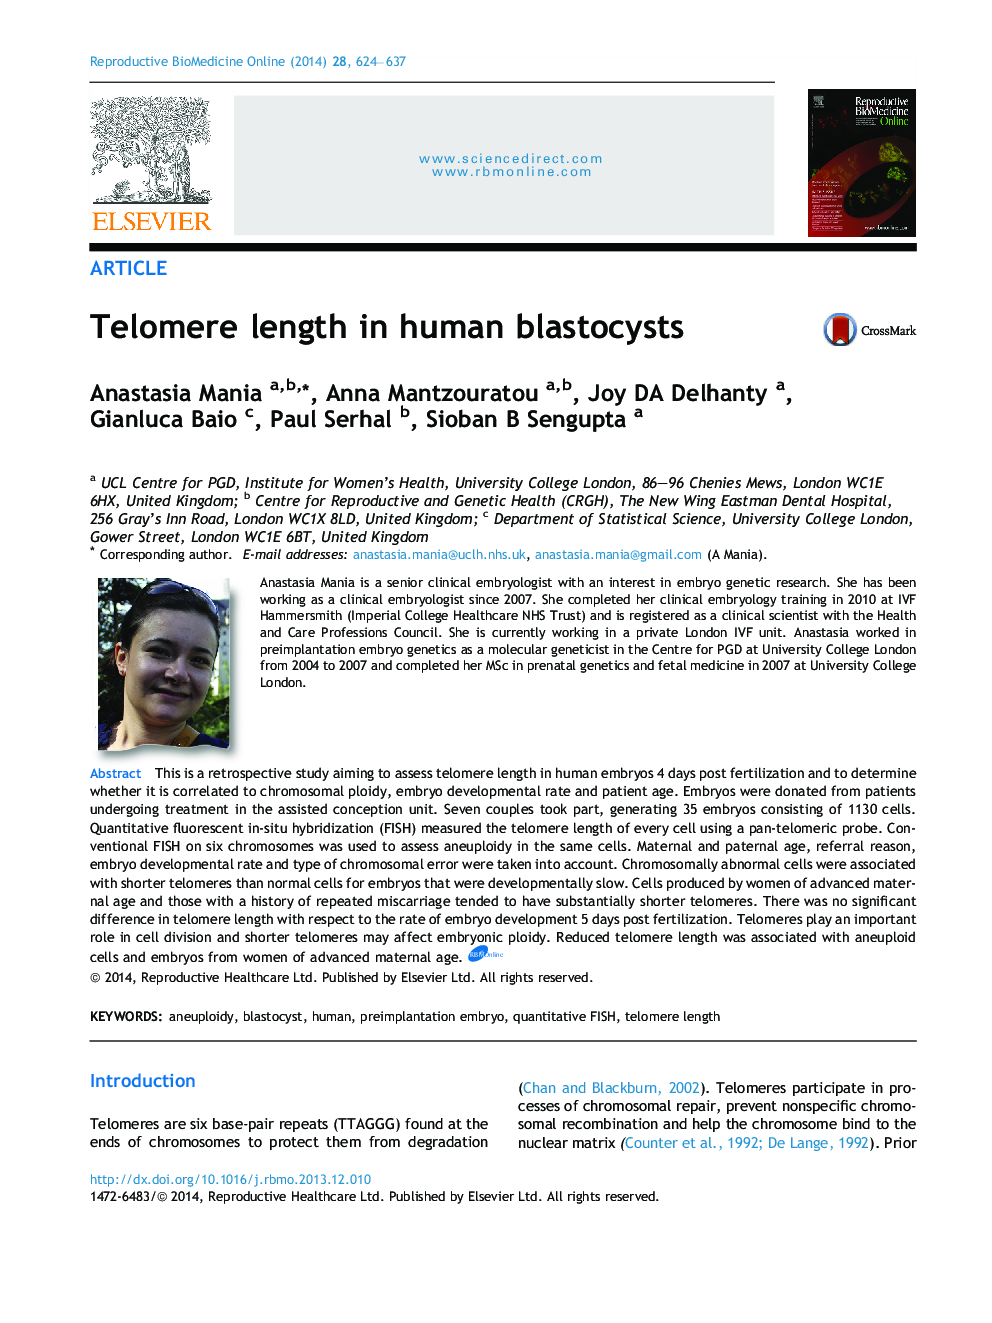 Telomere length in human blastocysts